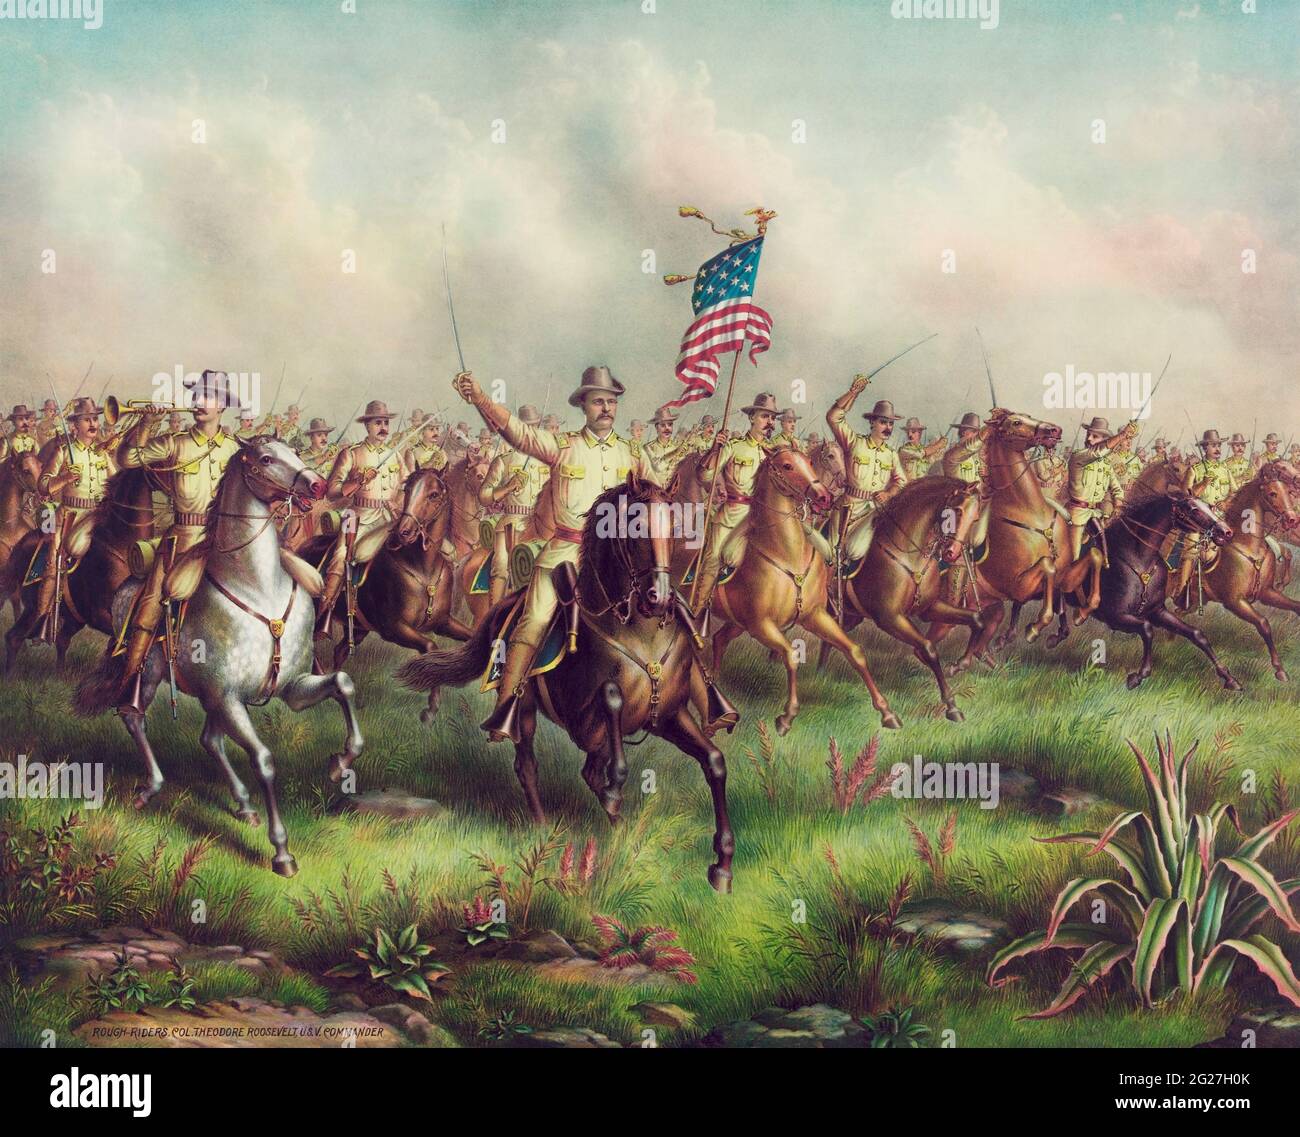 Col. Theodore Roosevelt leading the Rough Riders during the Spanish-American War. Stock Photo